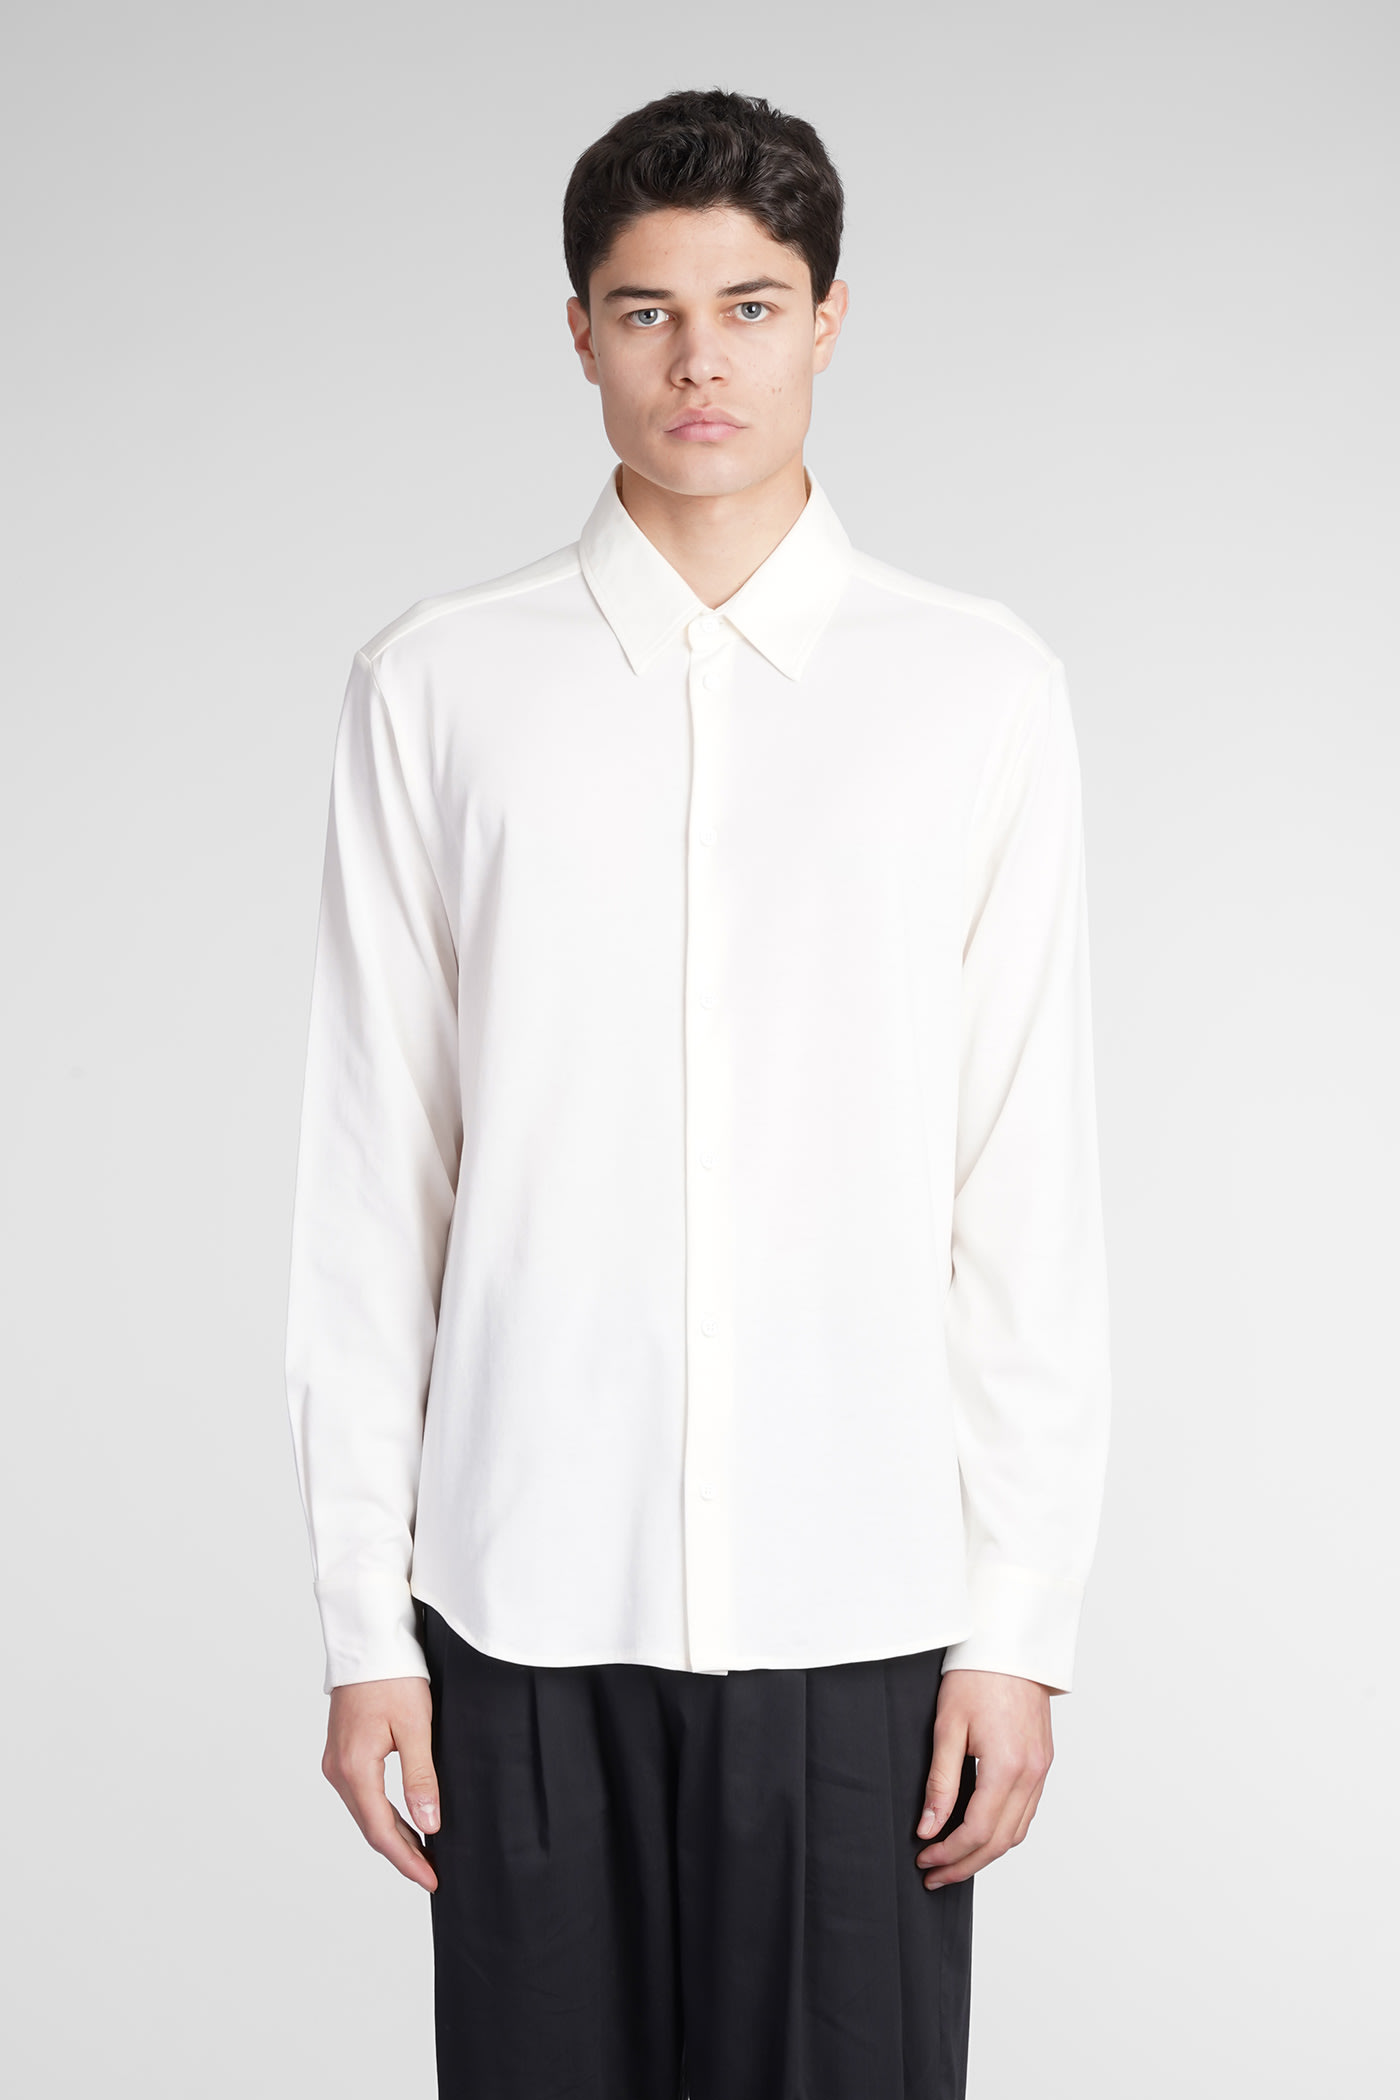 dressing gownRTO COLLINA SHIRT IN WHITE COTTON